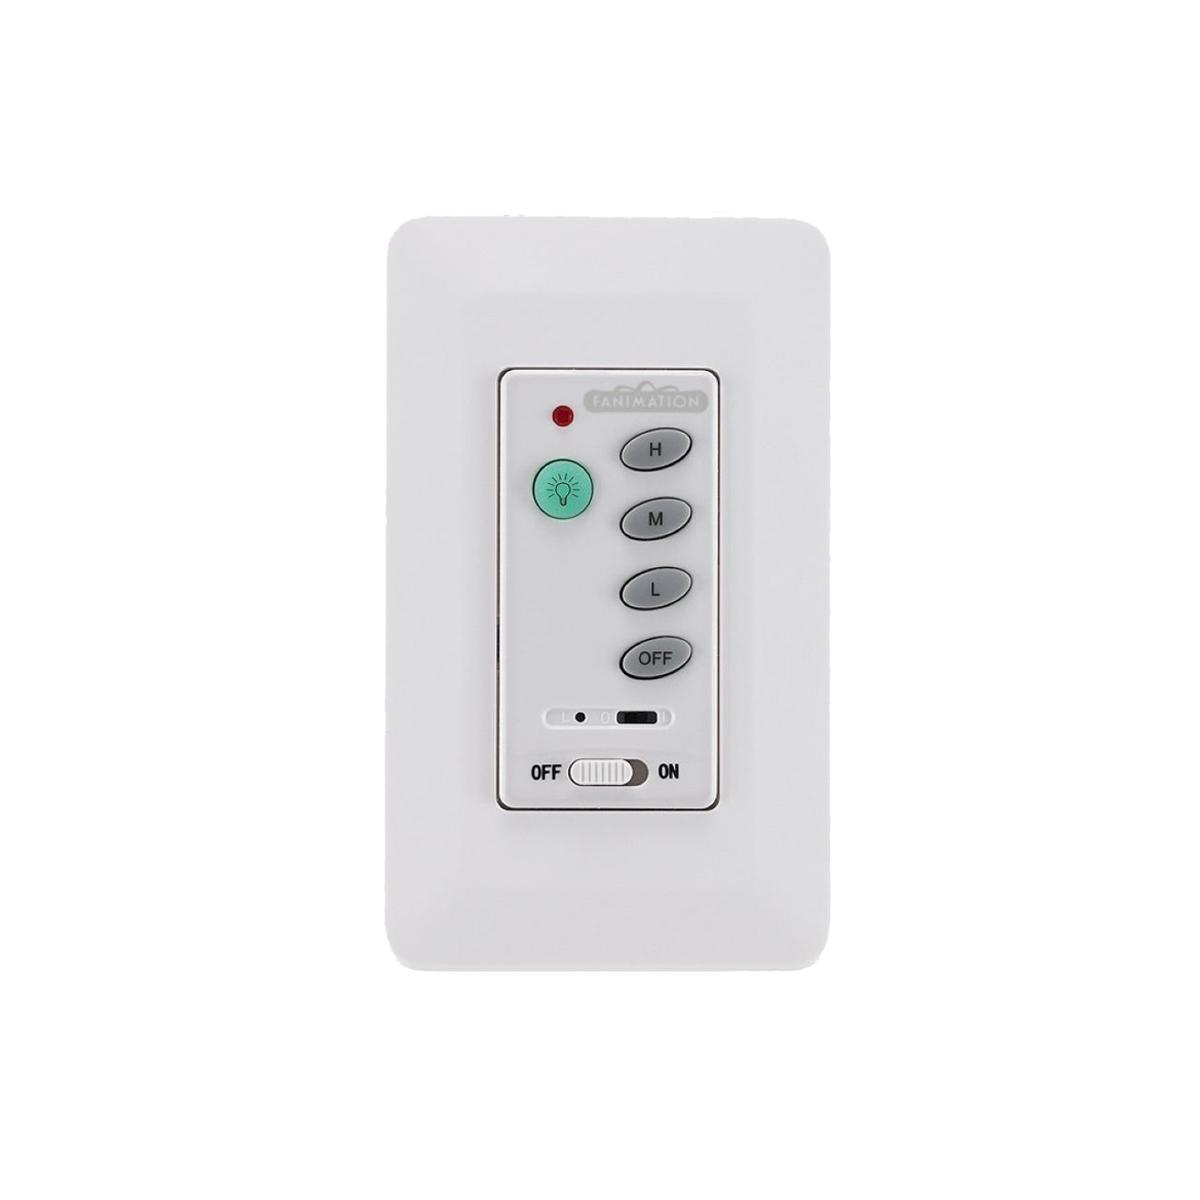 3-Speed Ceiling Fan And Light Wall Control With Receiver, Non-Reversing Switch